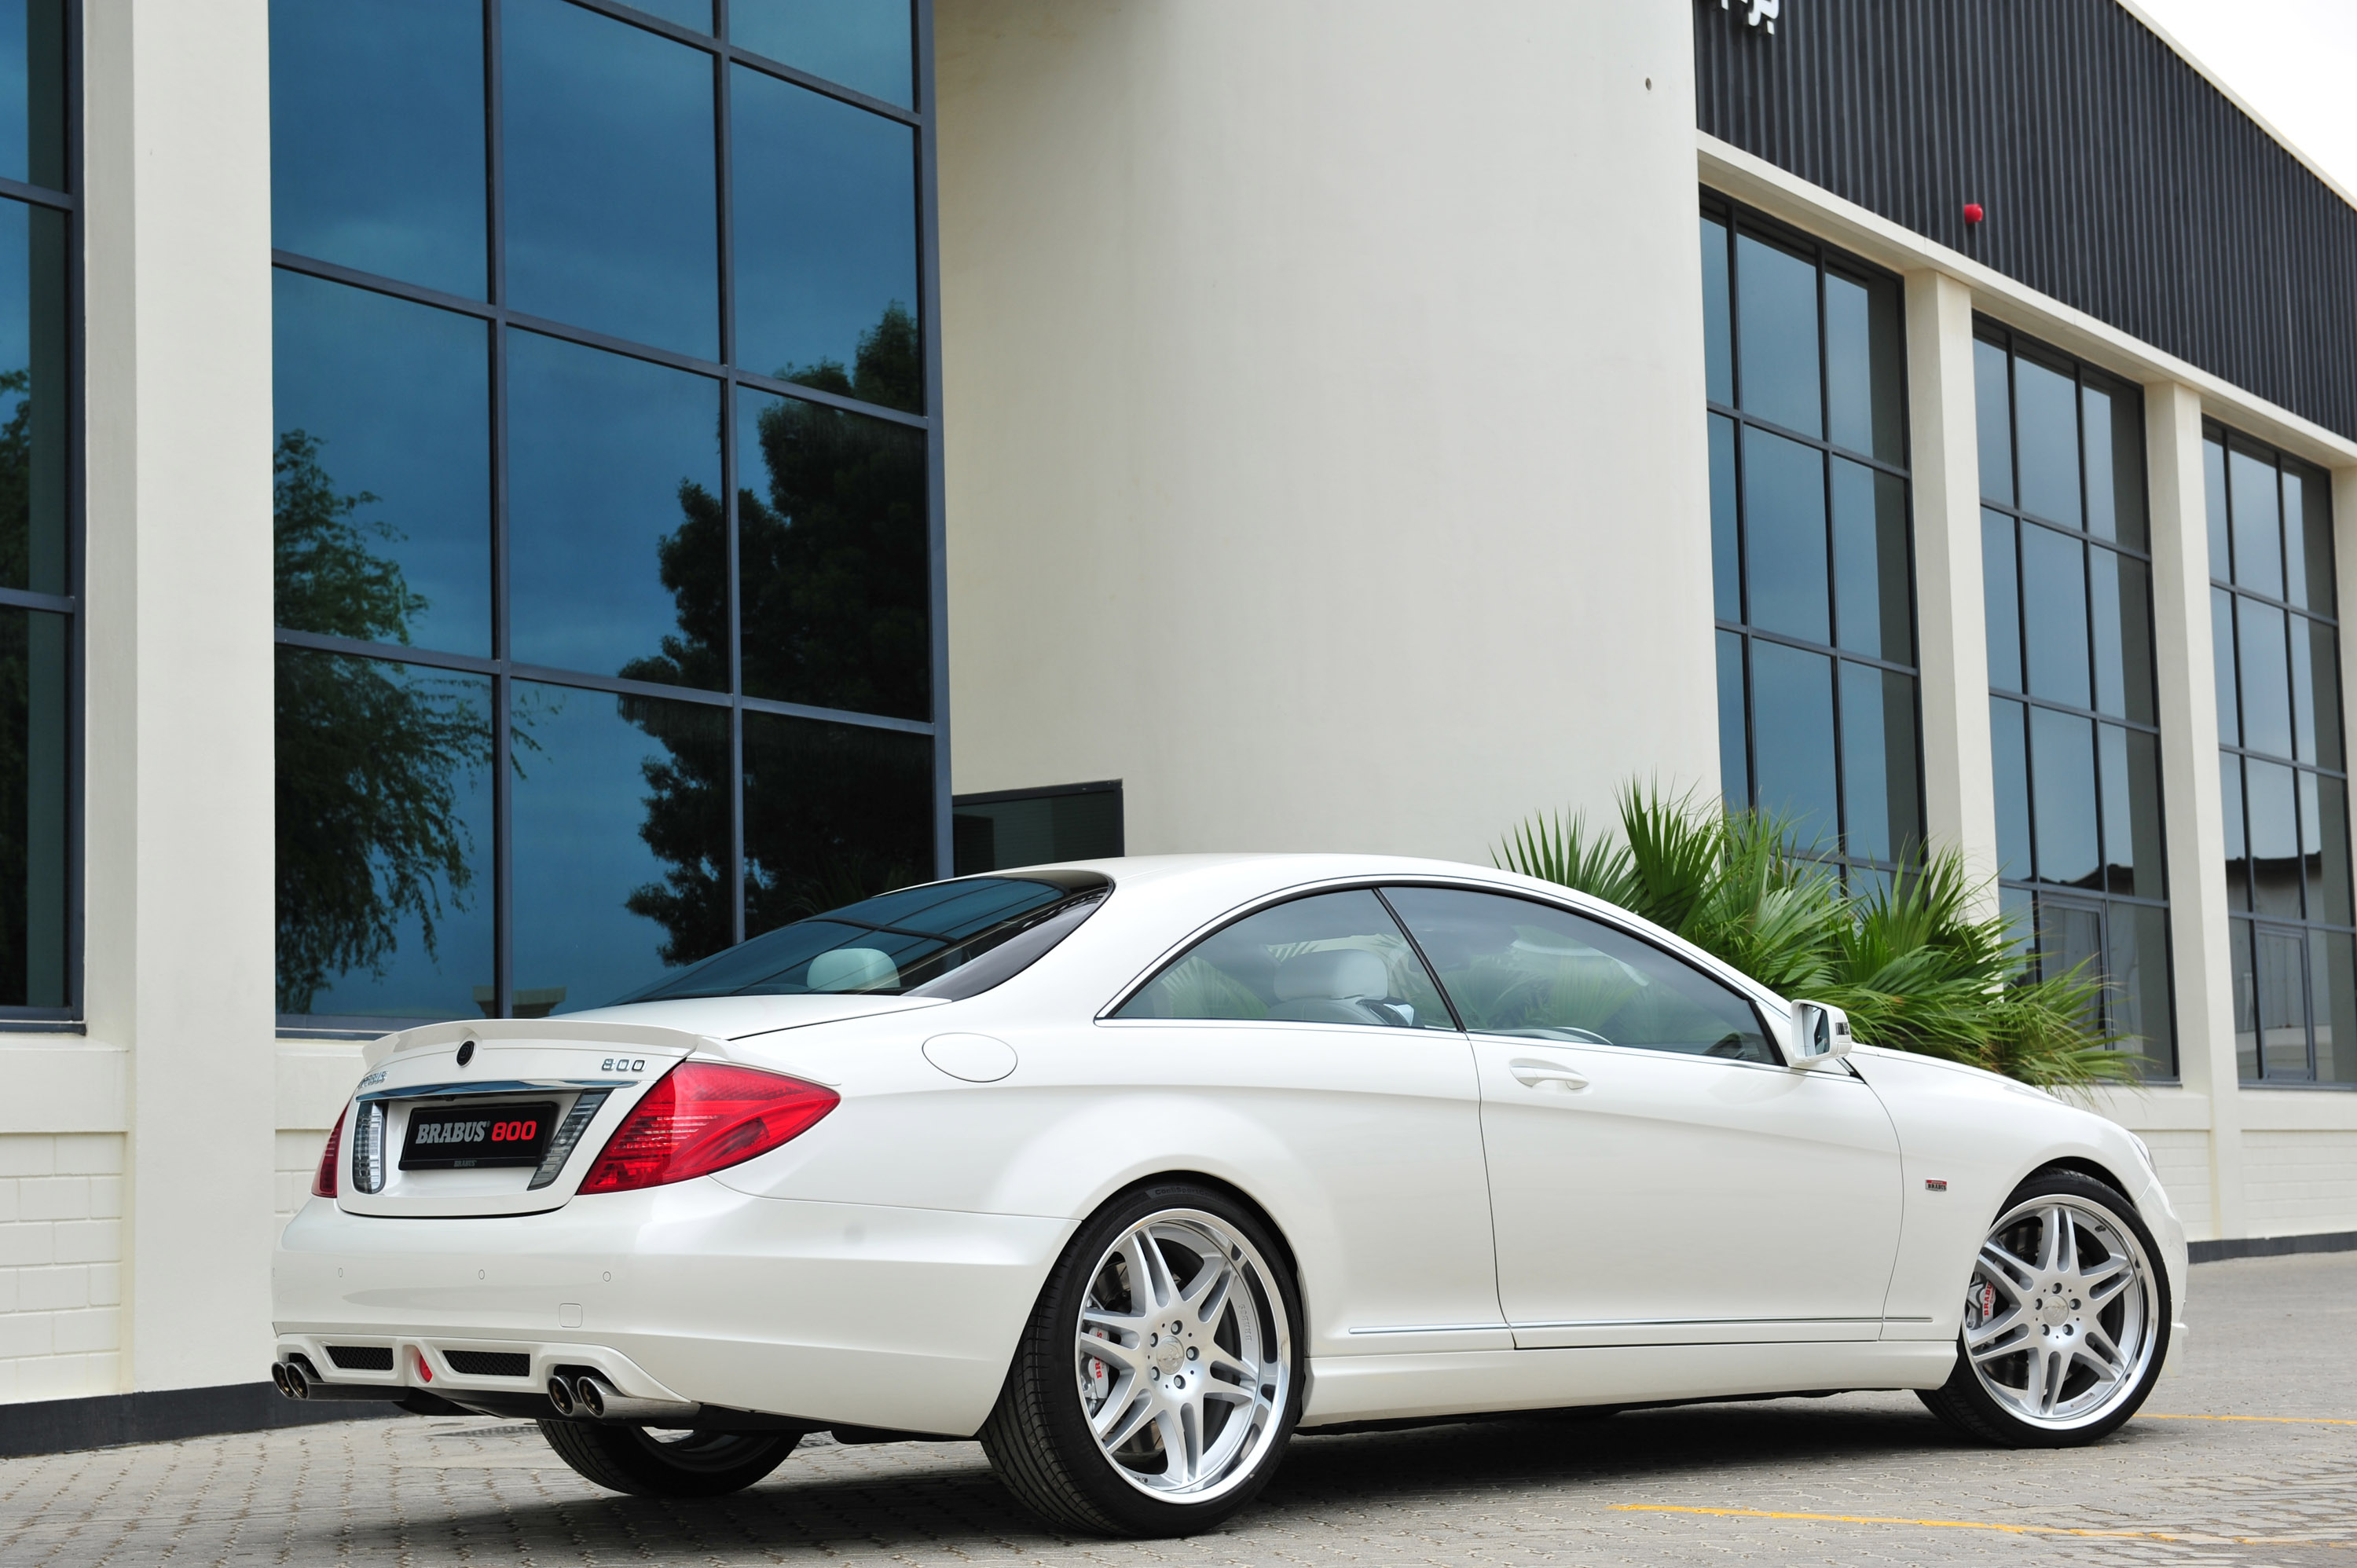 2011, Brabus, Mercedes, Benz, 800, Coupe, Tuning Wallpaper